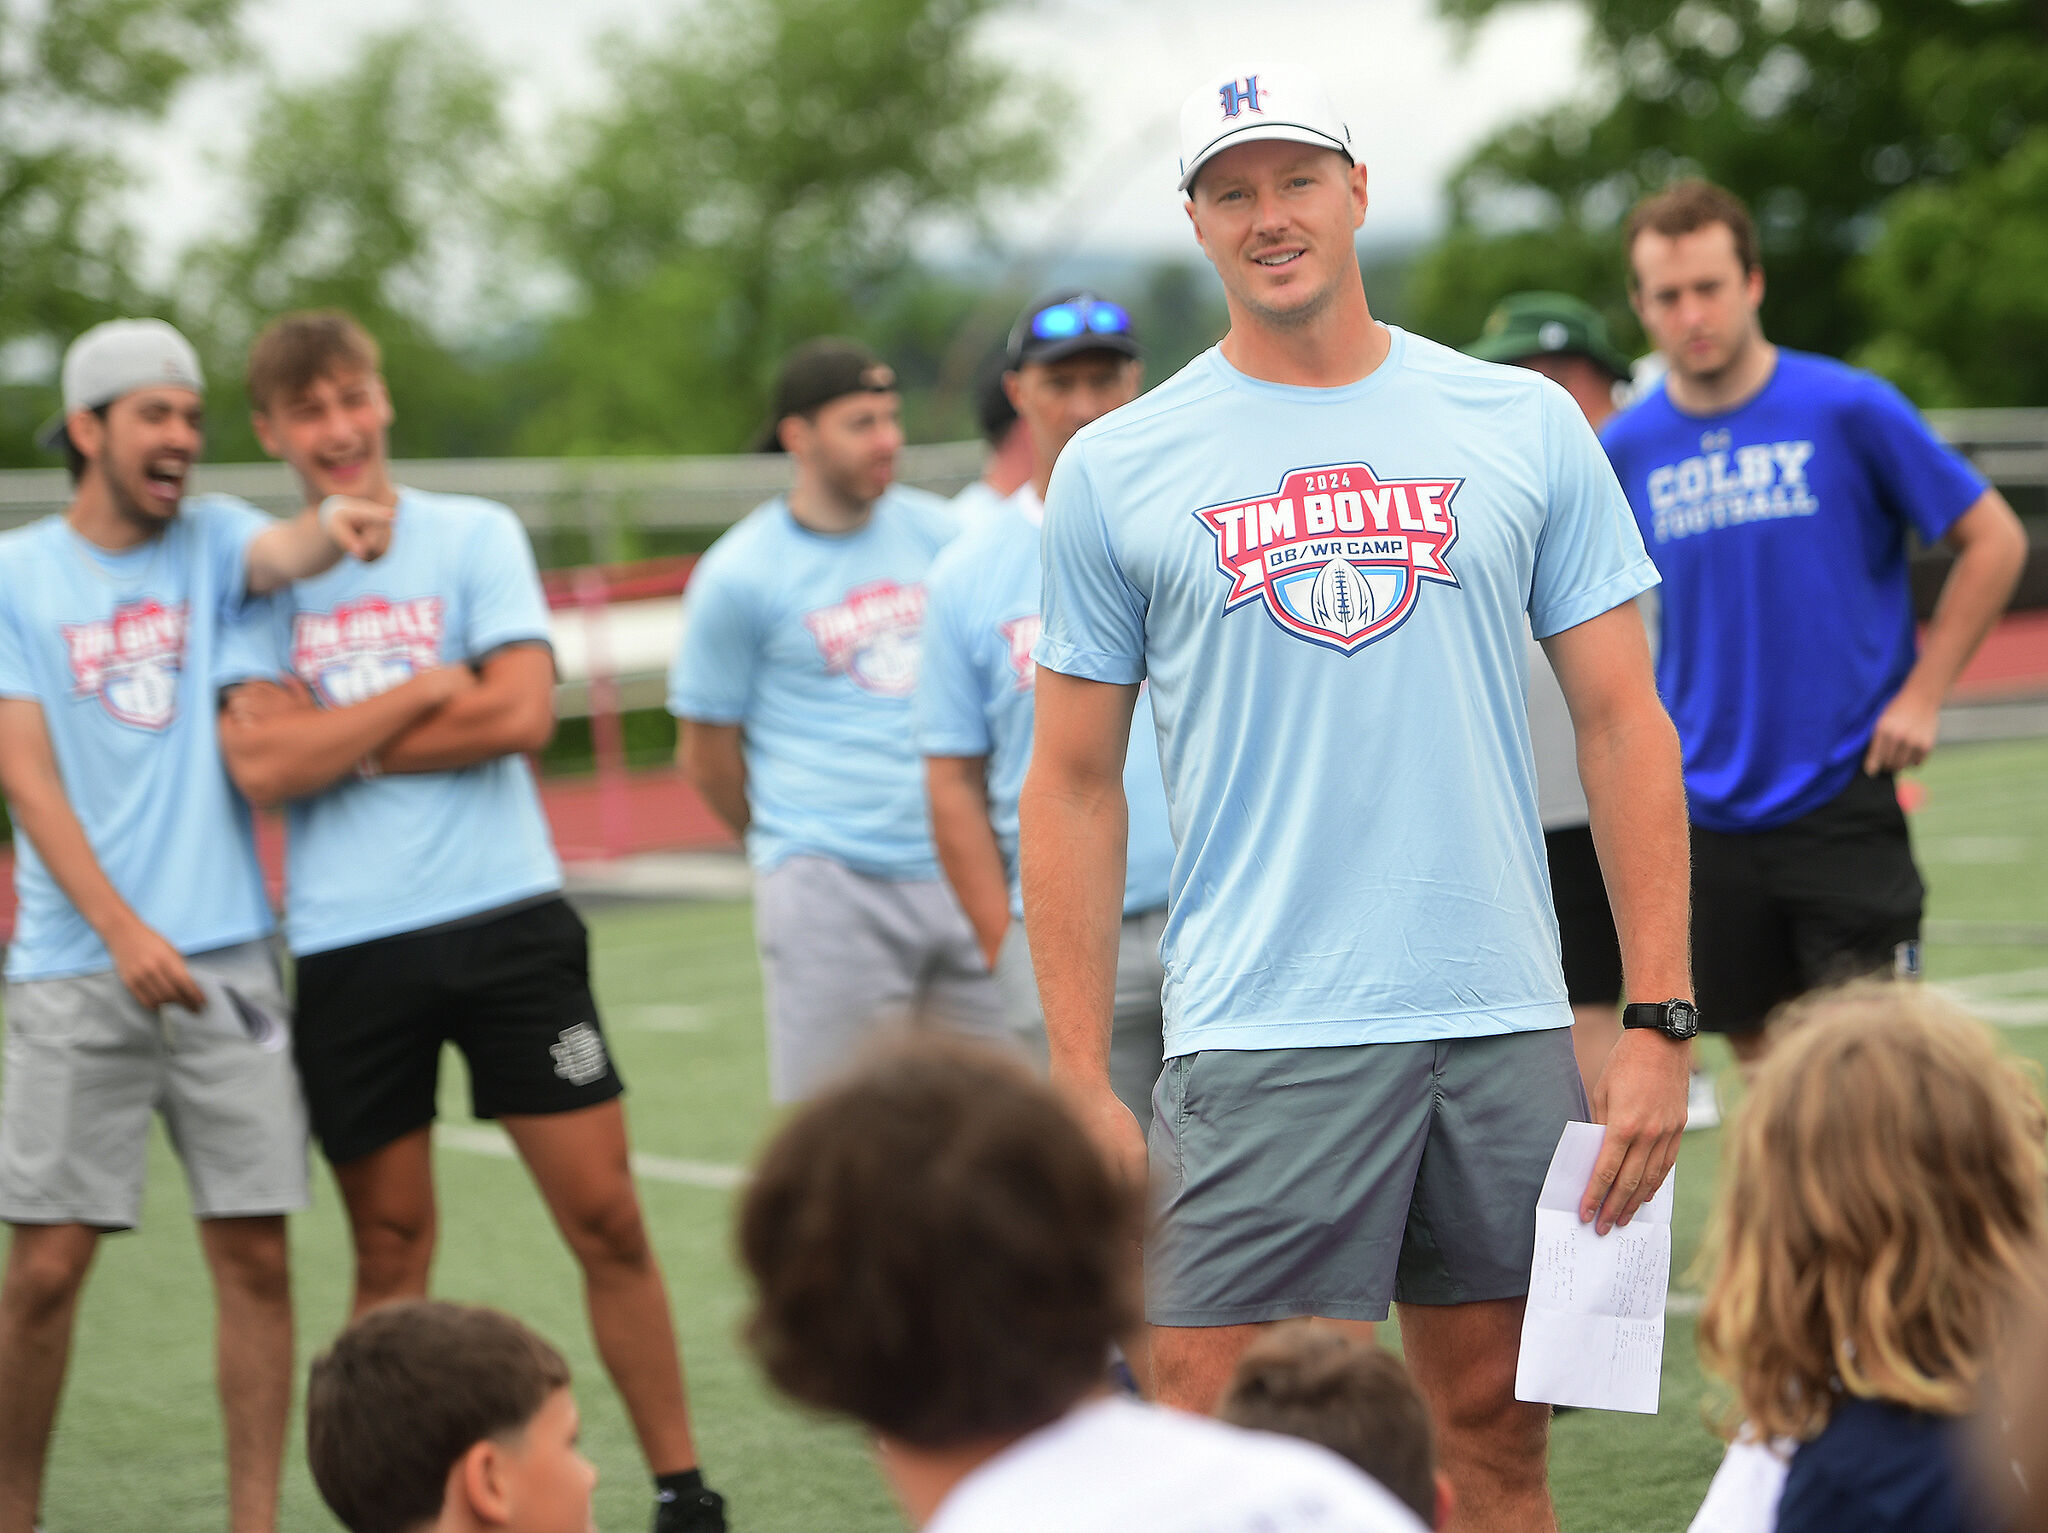 NFL quarterbacks Boyle and Levis return to their shared roots in Connecticut